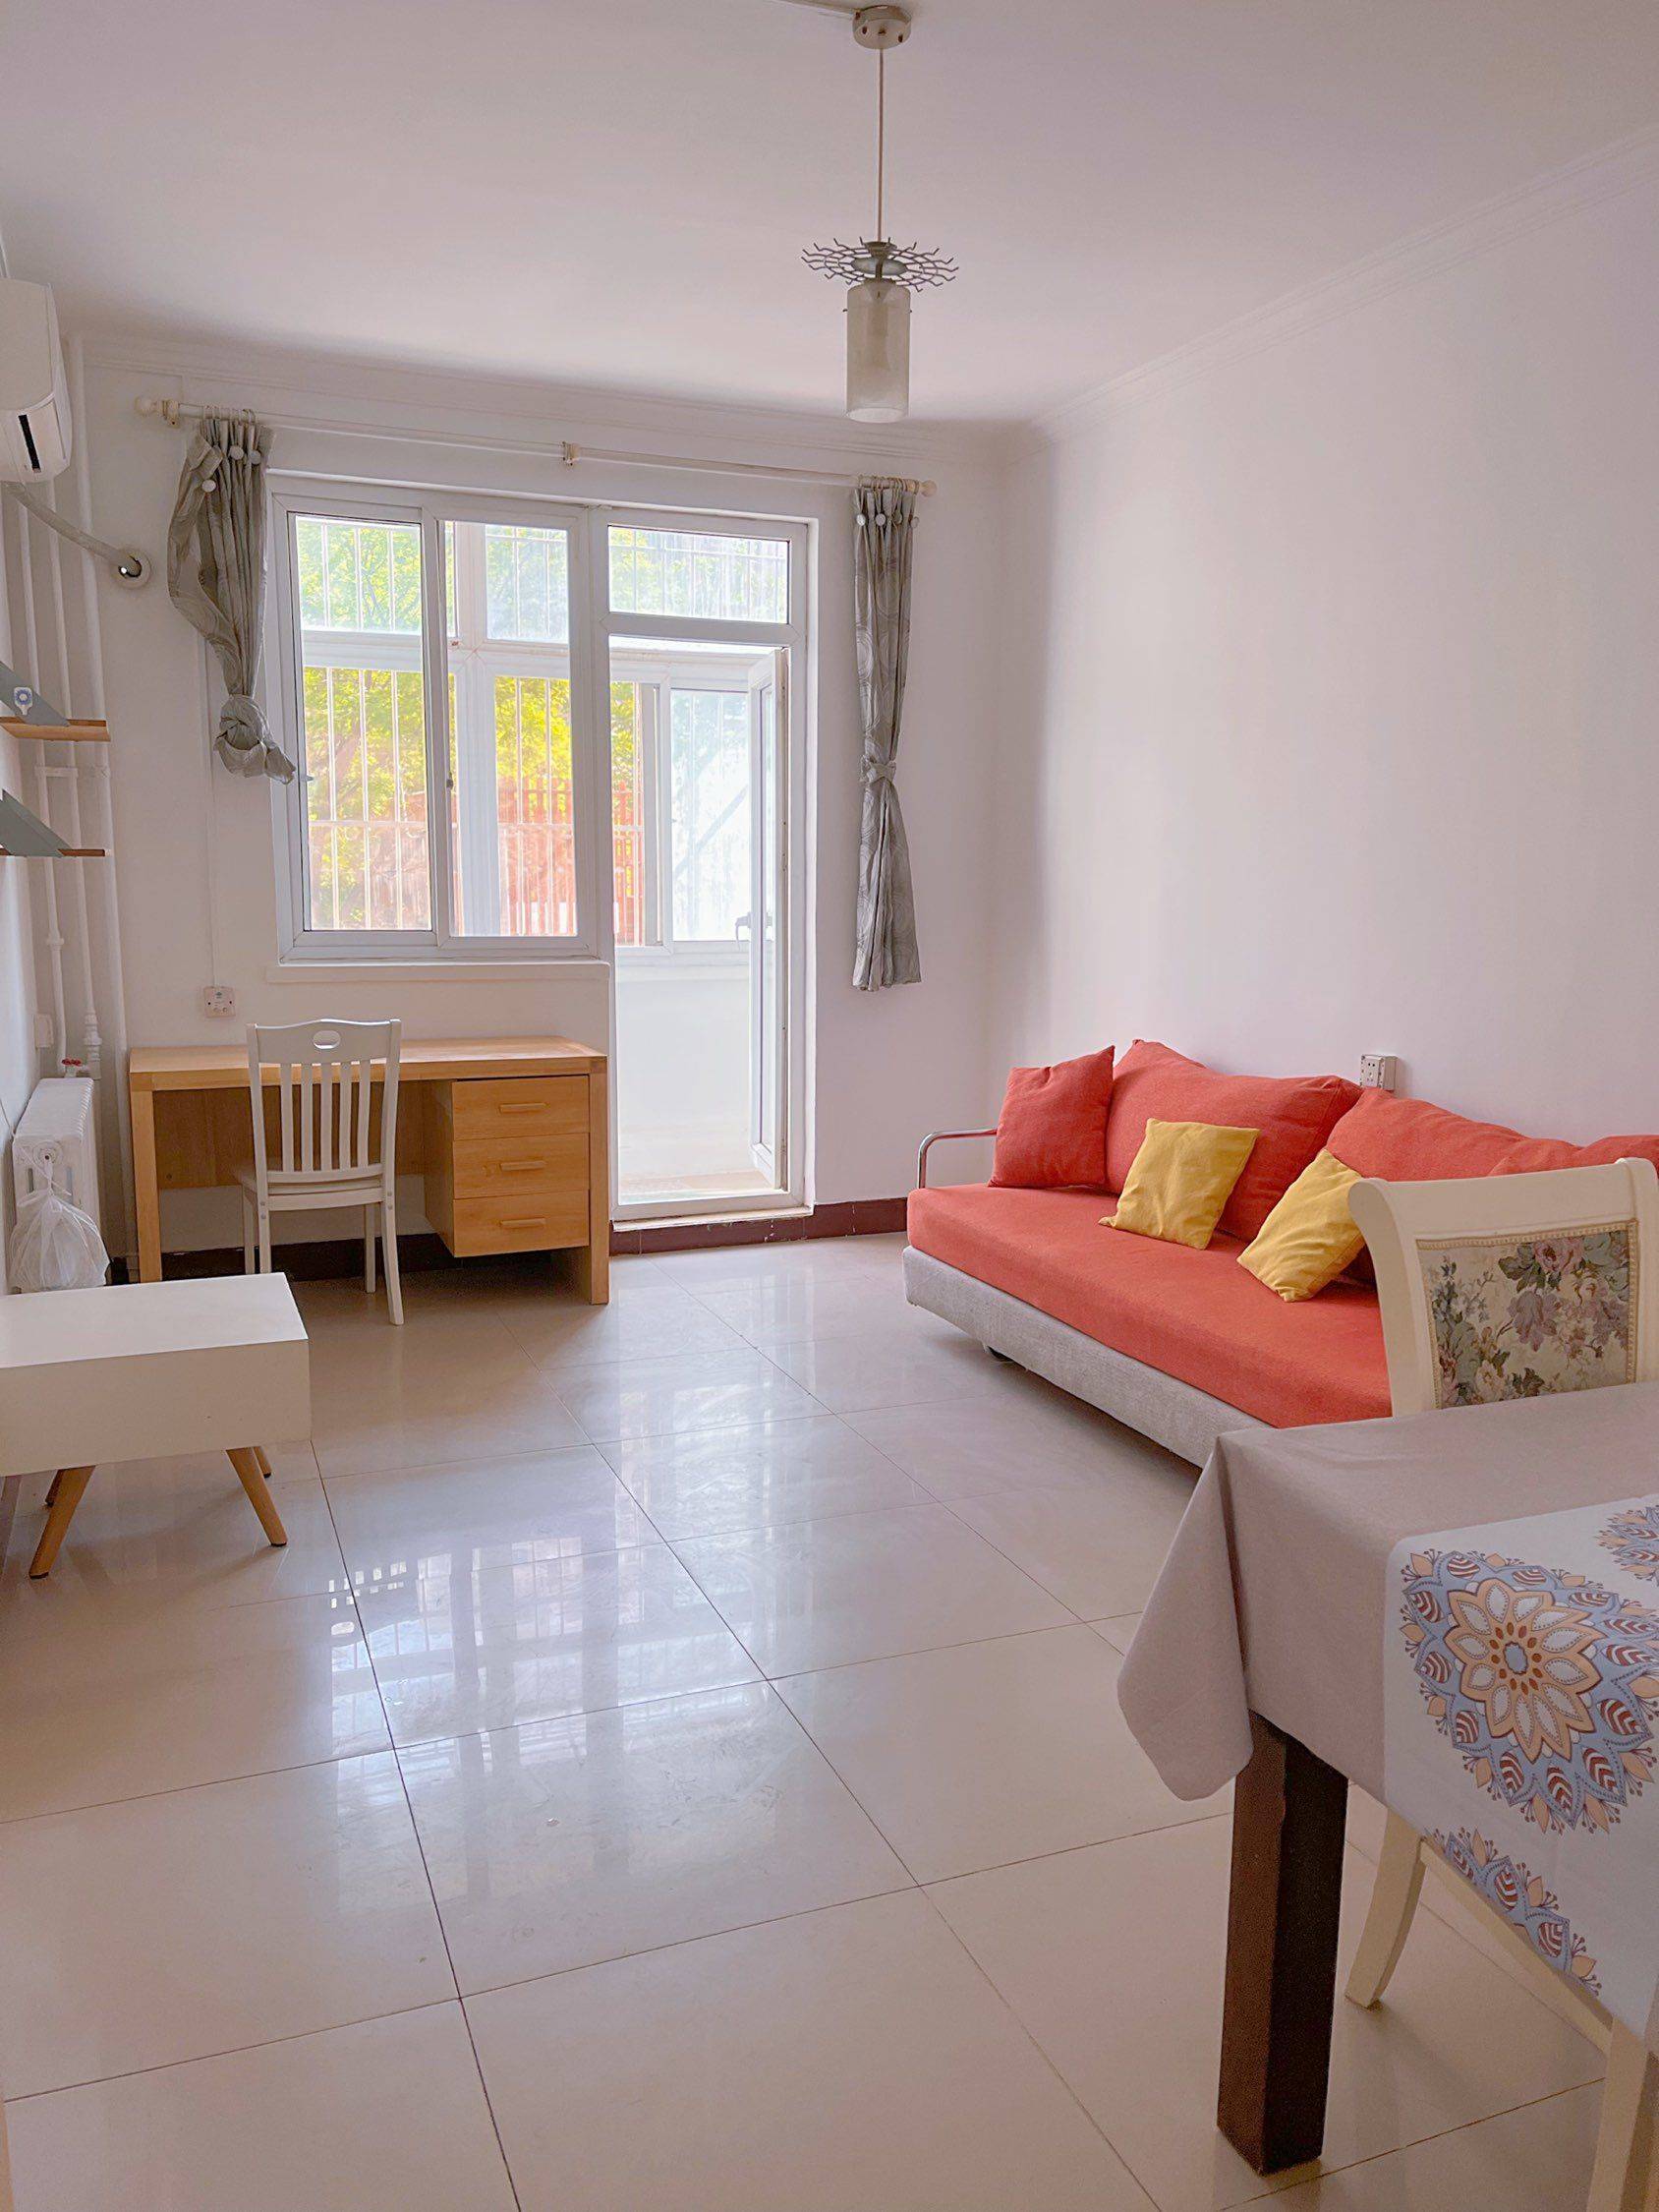 Beijing-Dongcheng-Cozy Home,Clean&Comfy,No Gender Limit,Chilled,LGBTQ Friendly,Pet Friendly